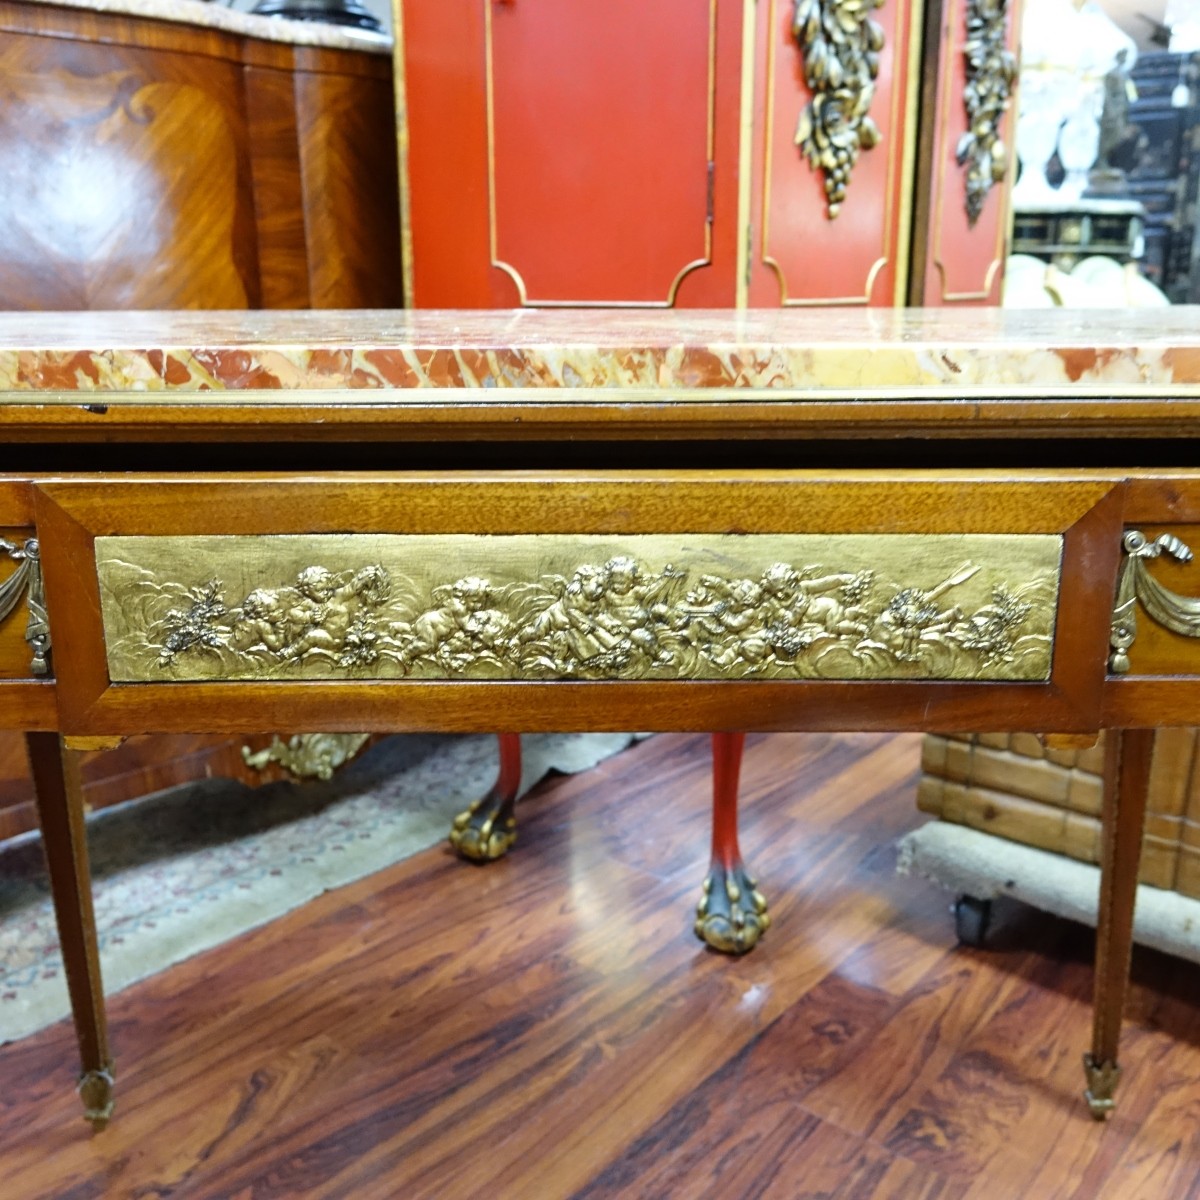 Antique French Louis XVI Style Center Table